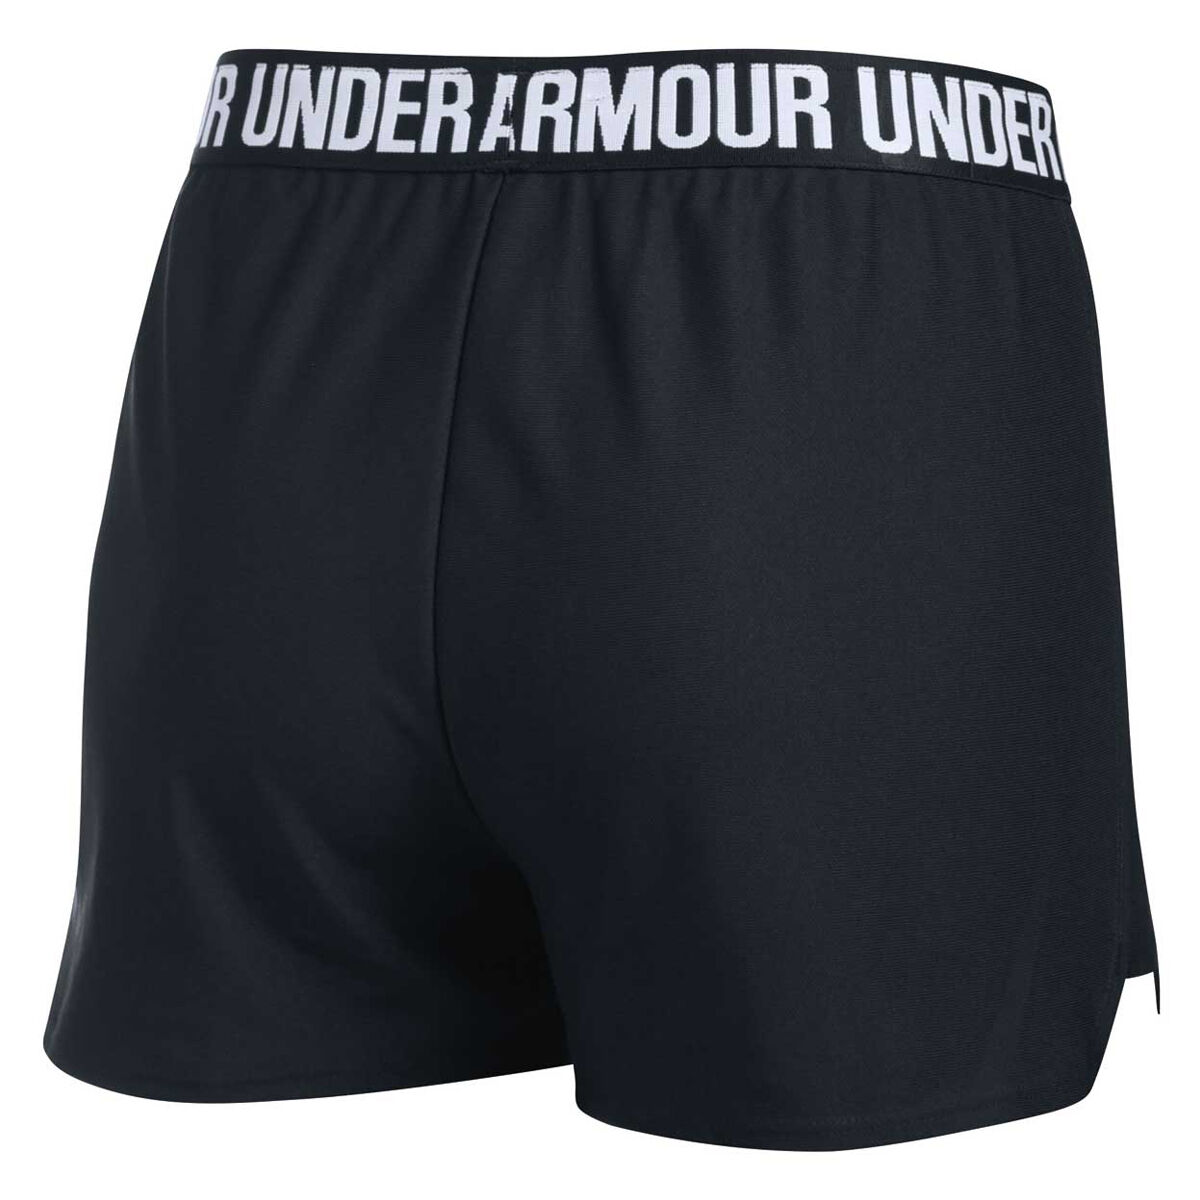 womens white under armour shorts